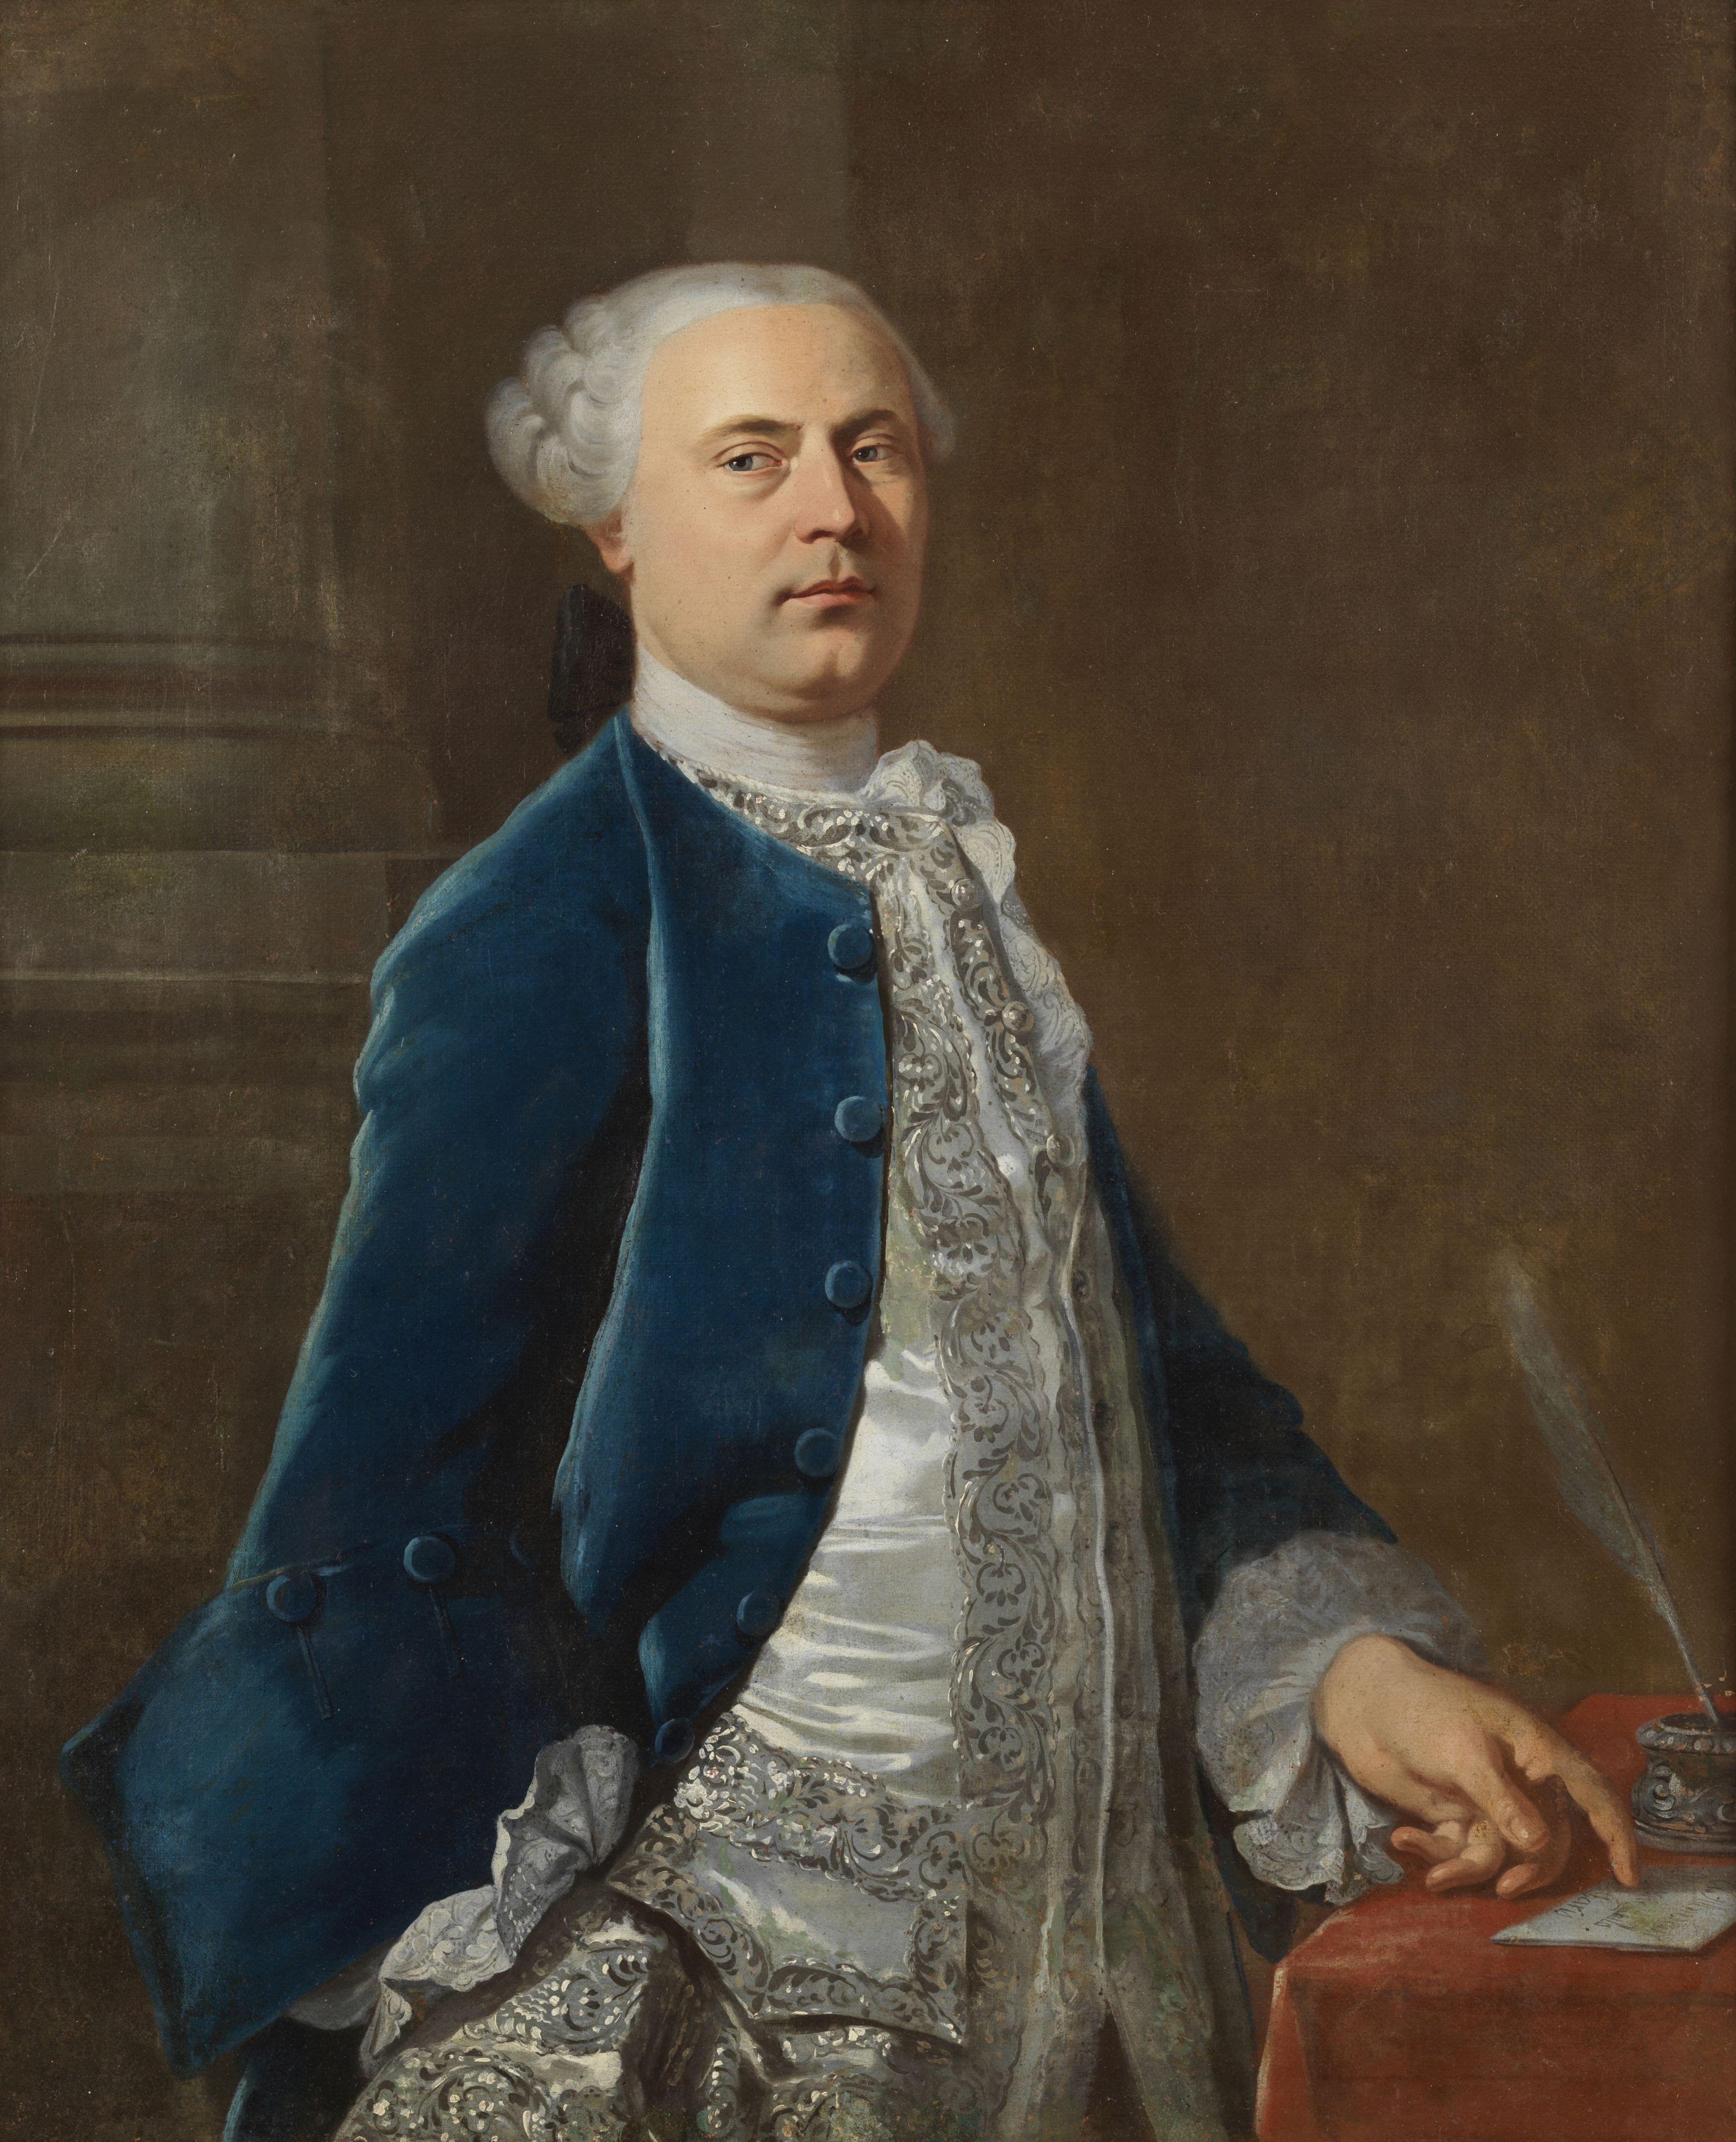 Painting, oil on canvas, measuring 92 x 75 cm without frame and 102 x 87 cm with frame depicting a nobleman of the French school of the first half of the 18th century.

In its formal simplification, this simple image with the unkempt hair with the